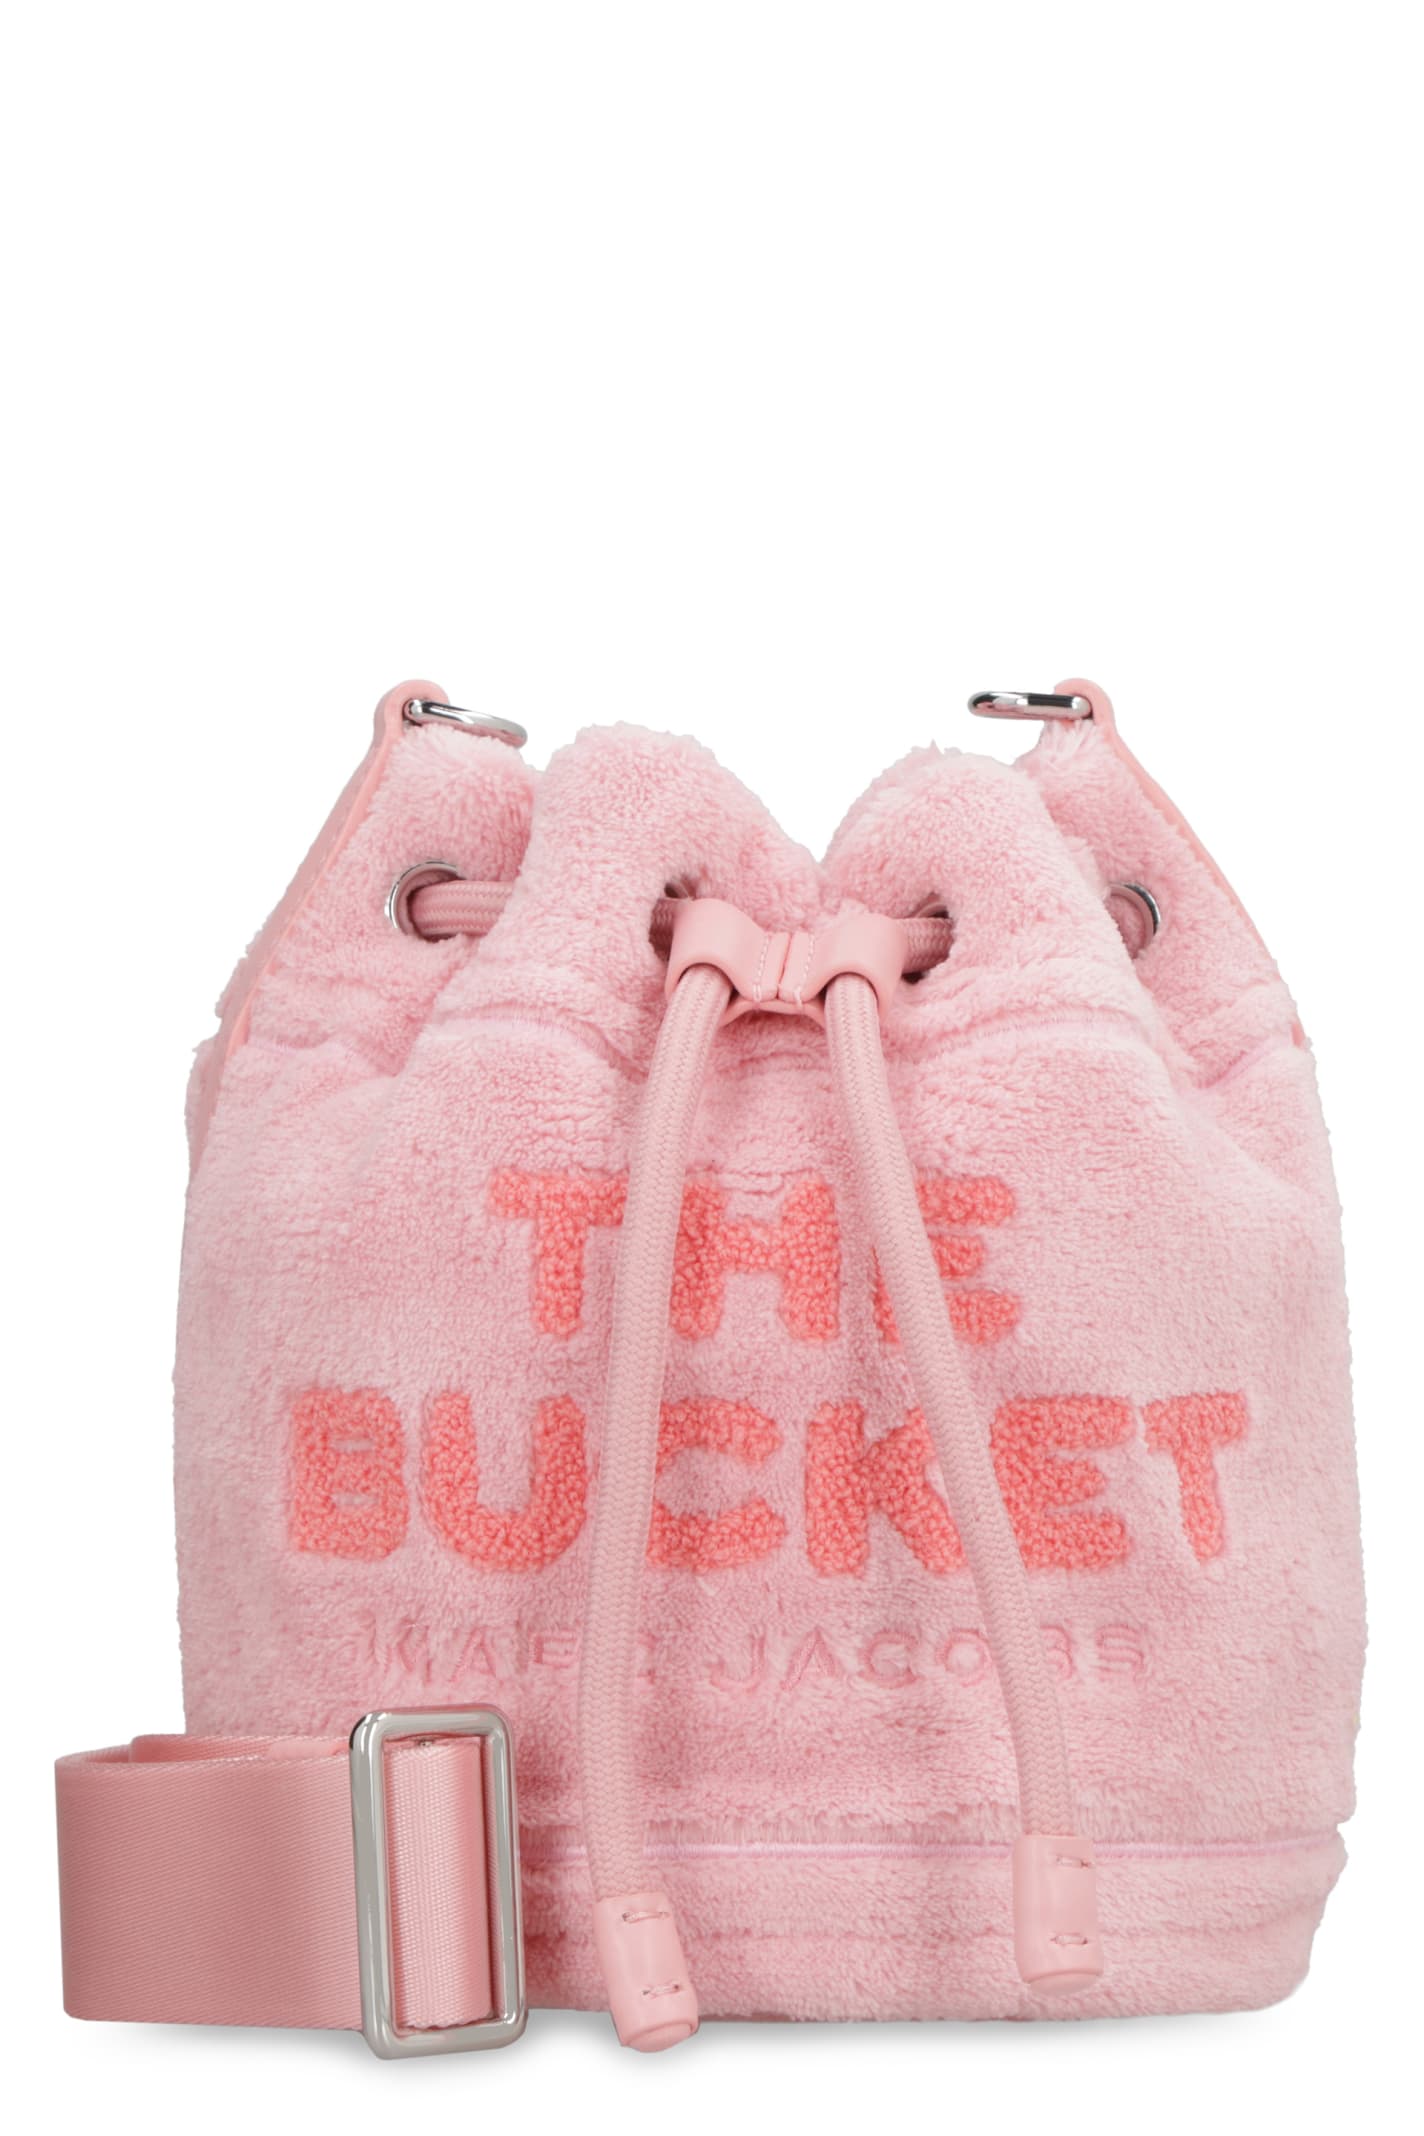 Marc Jacobs The Terry Bucket Bag